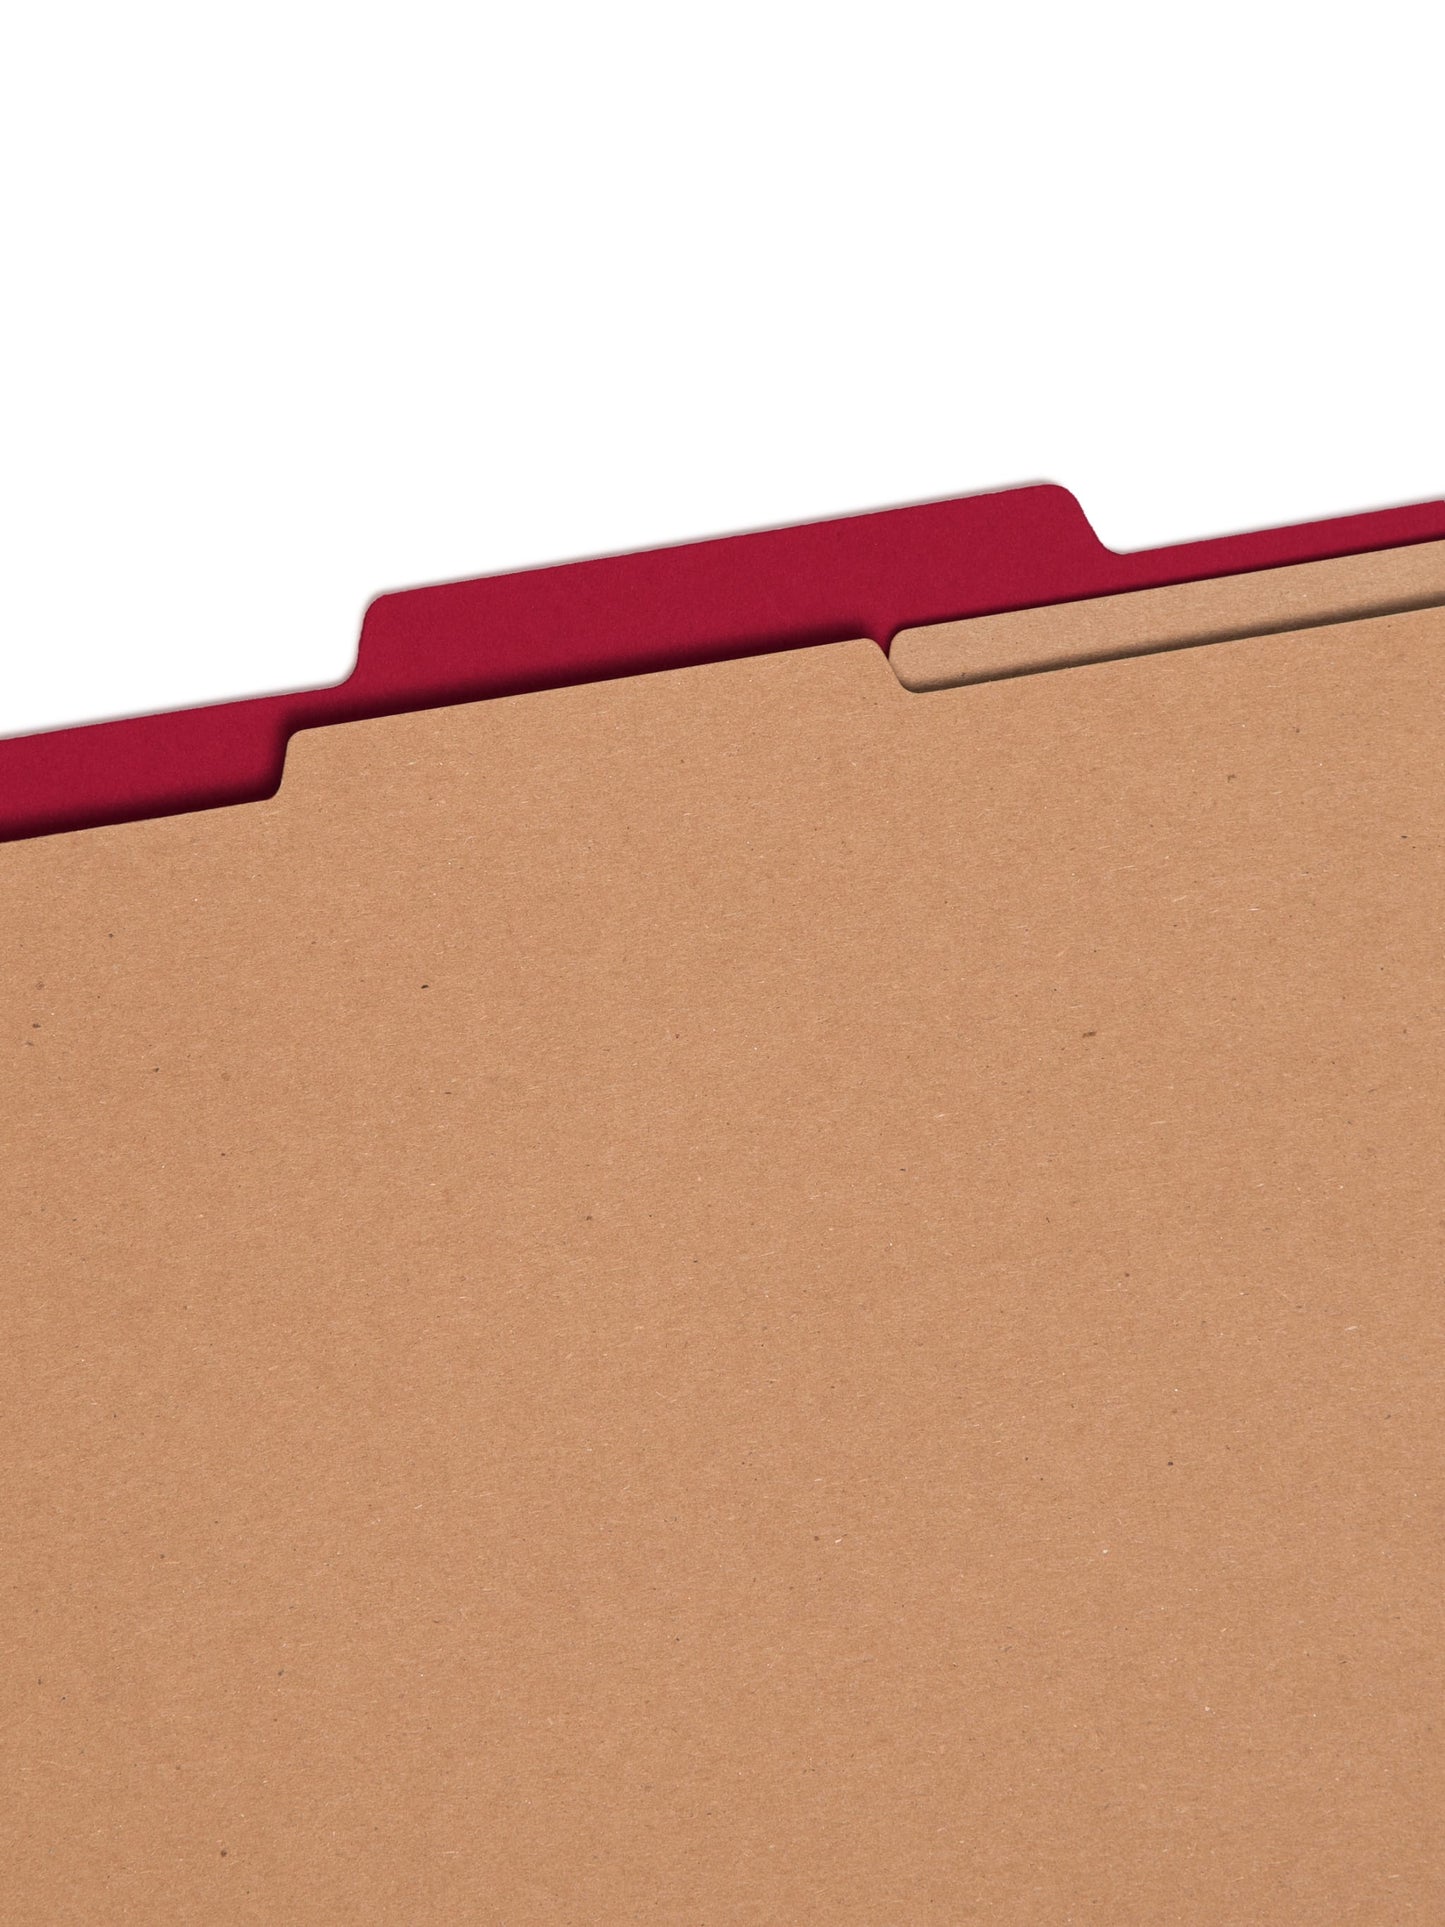 SafeSHIELD® Premium Pressboard Classification File Folders, 2 Dividers, 2 inch Expansion, 2/5-Cut Tab, Bright Red Color, Legal Size, Set of 0, 30086486192027